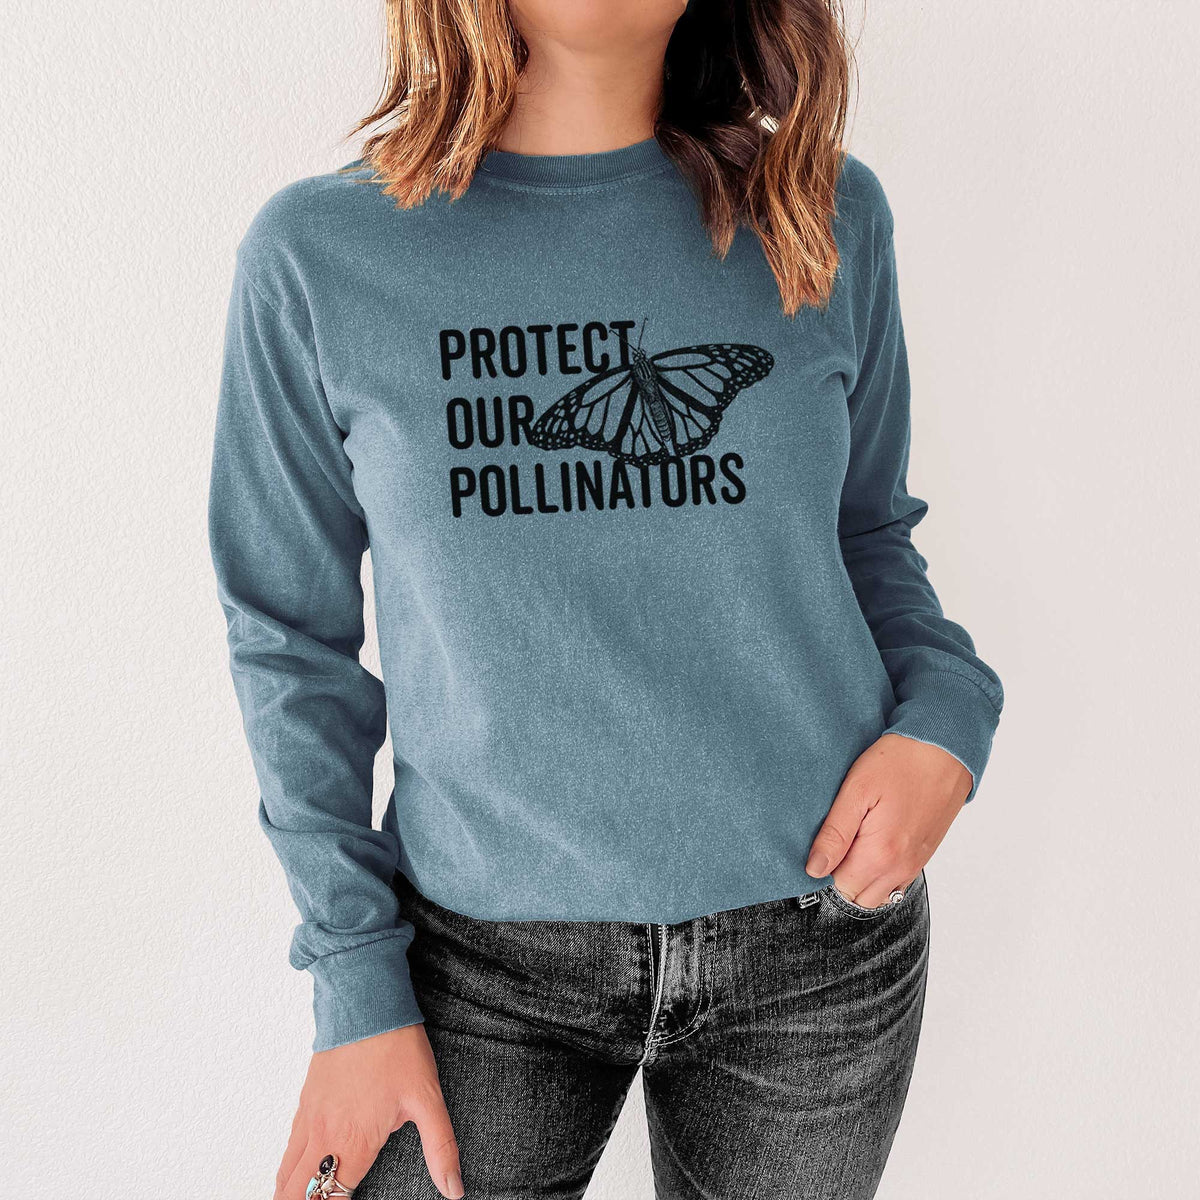 Protect our Pollinators - Heavyweight 100% Cotton Long Sleeve